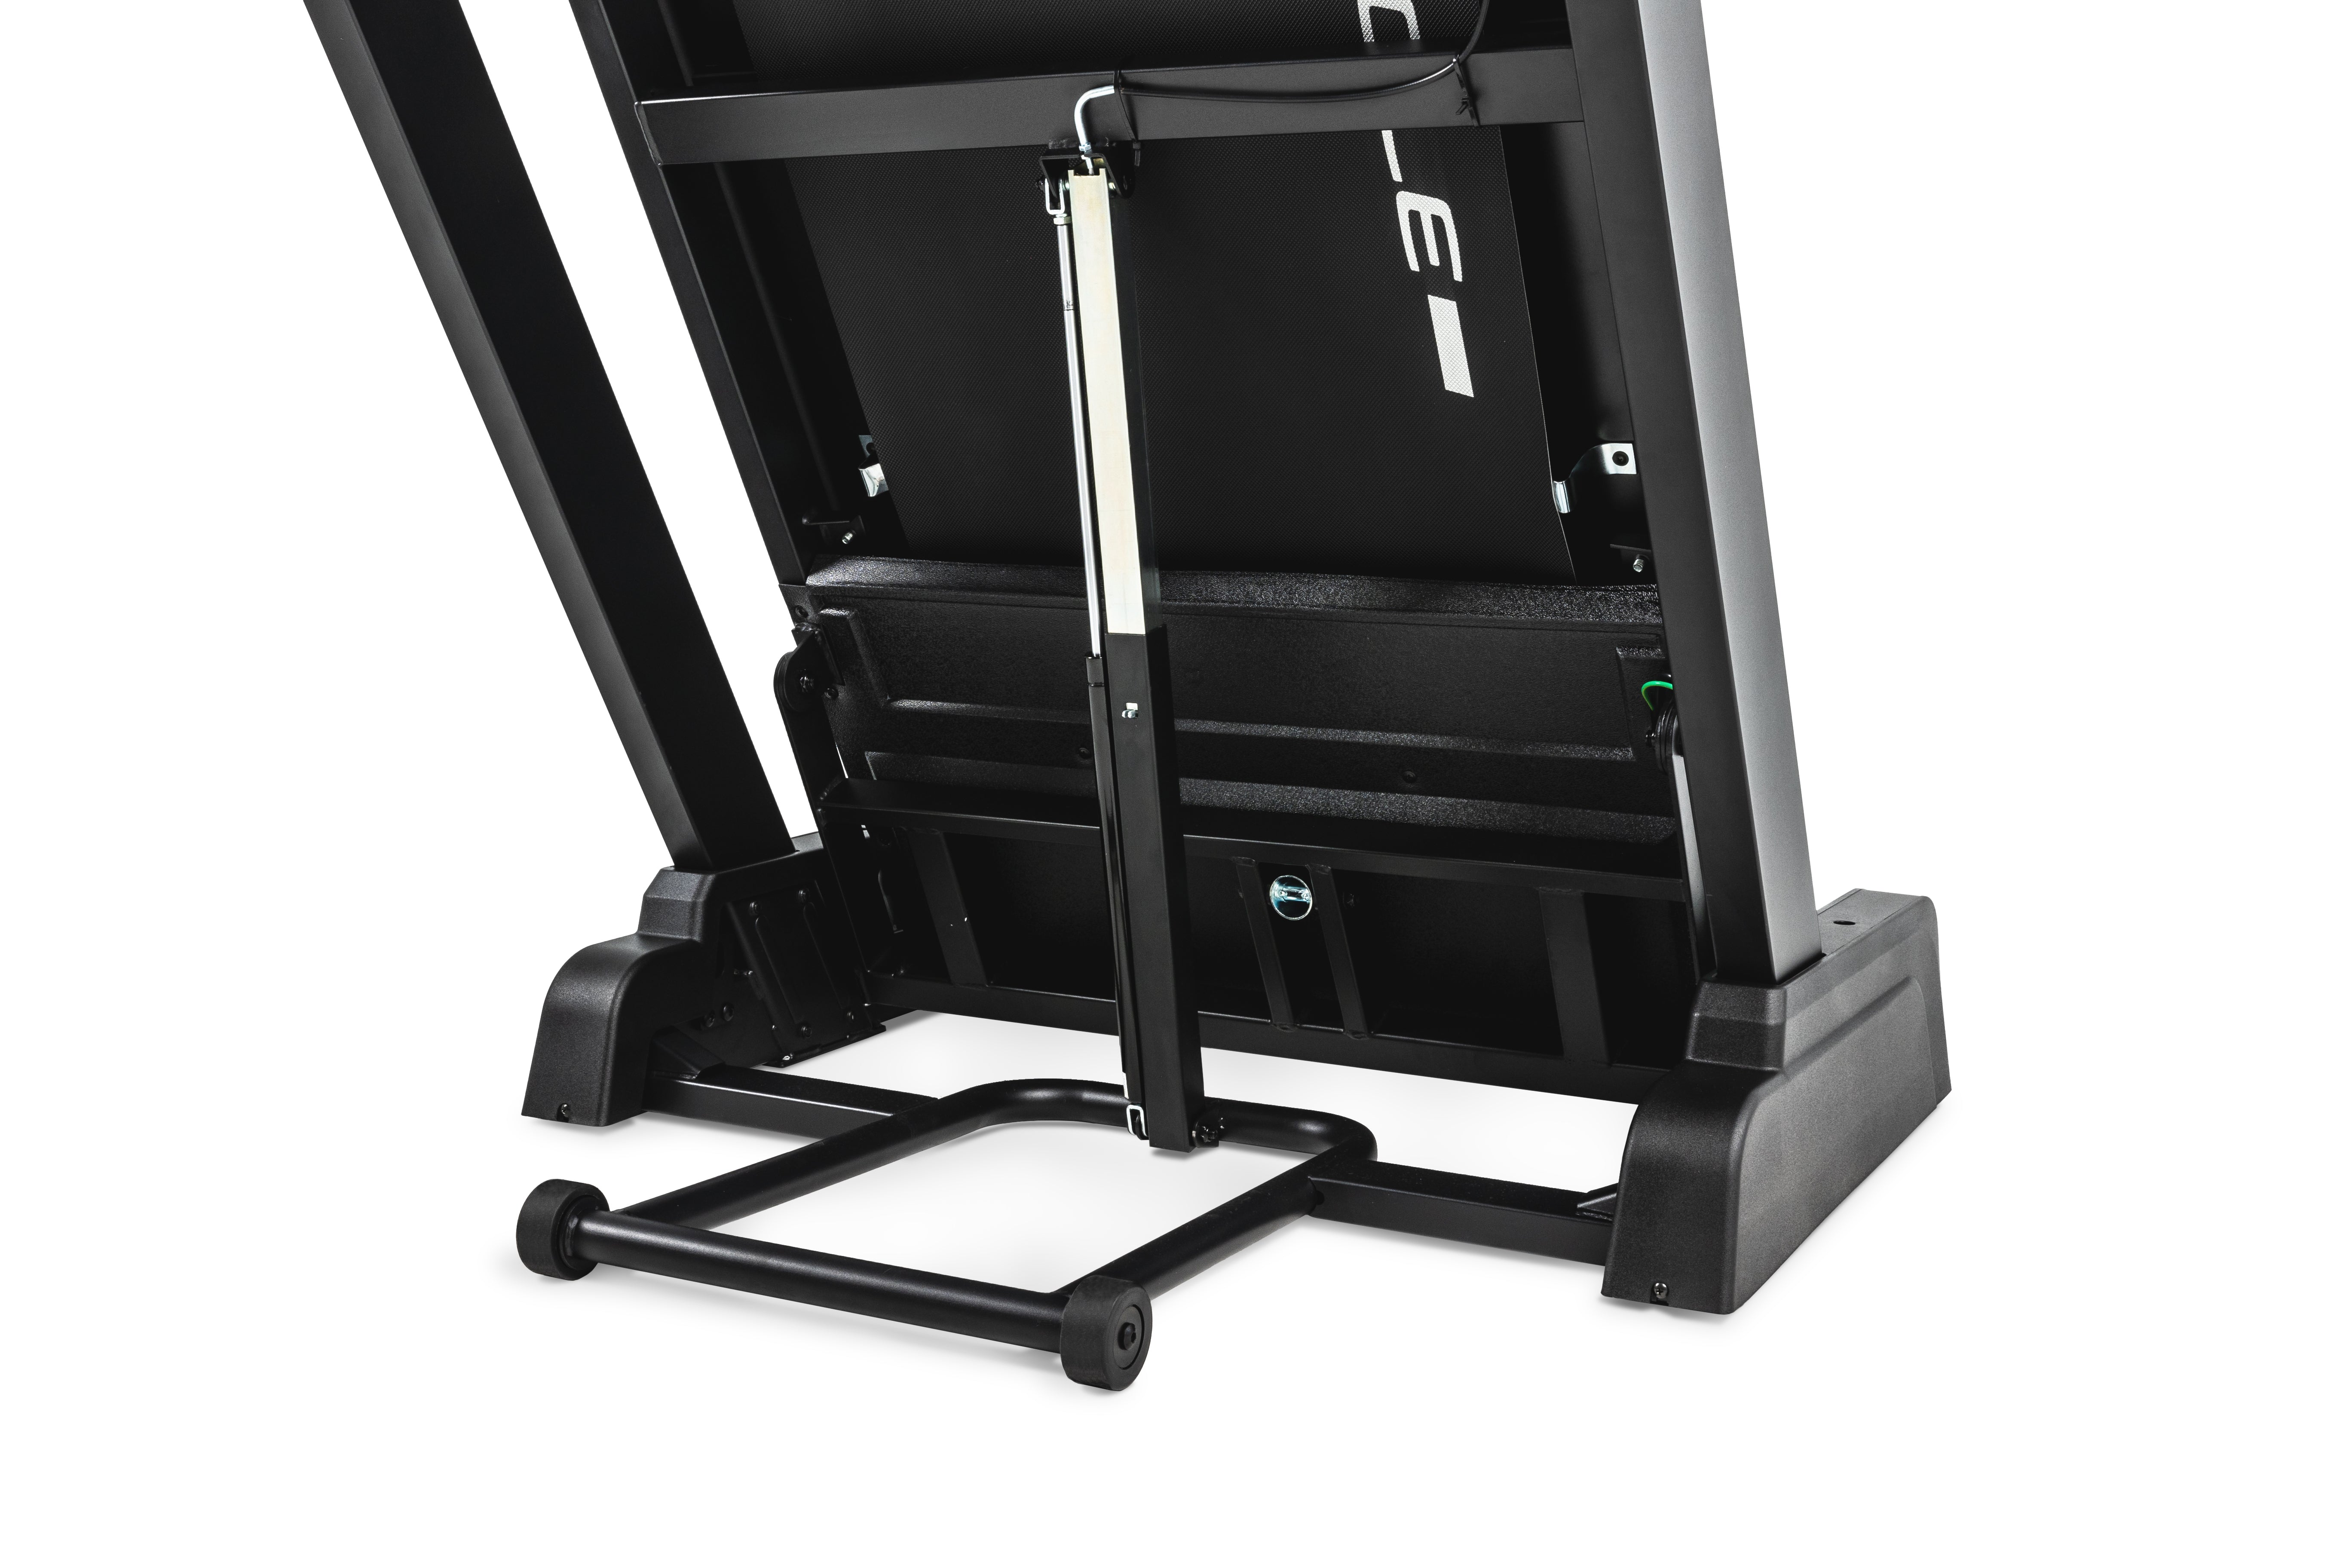 Rear view of the Sole F80 treadmill, focusing on the folded deck mechanism with a metal support bar, the textured black surface with 'F80' branding, and the sturdy base with transport wheels.